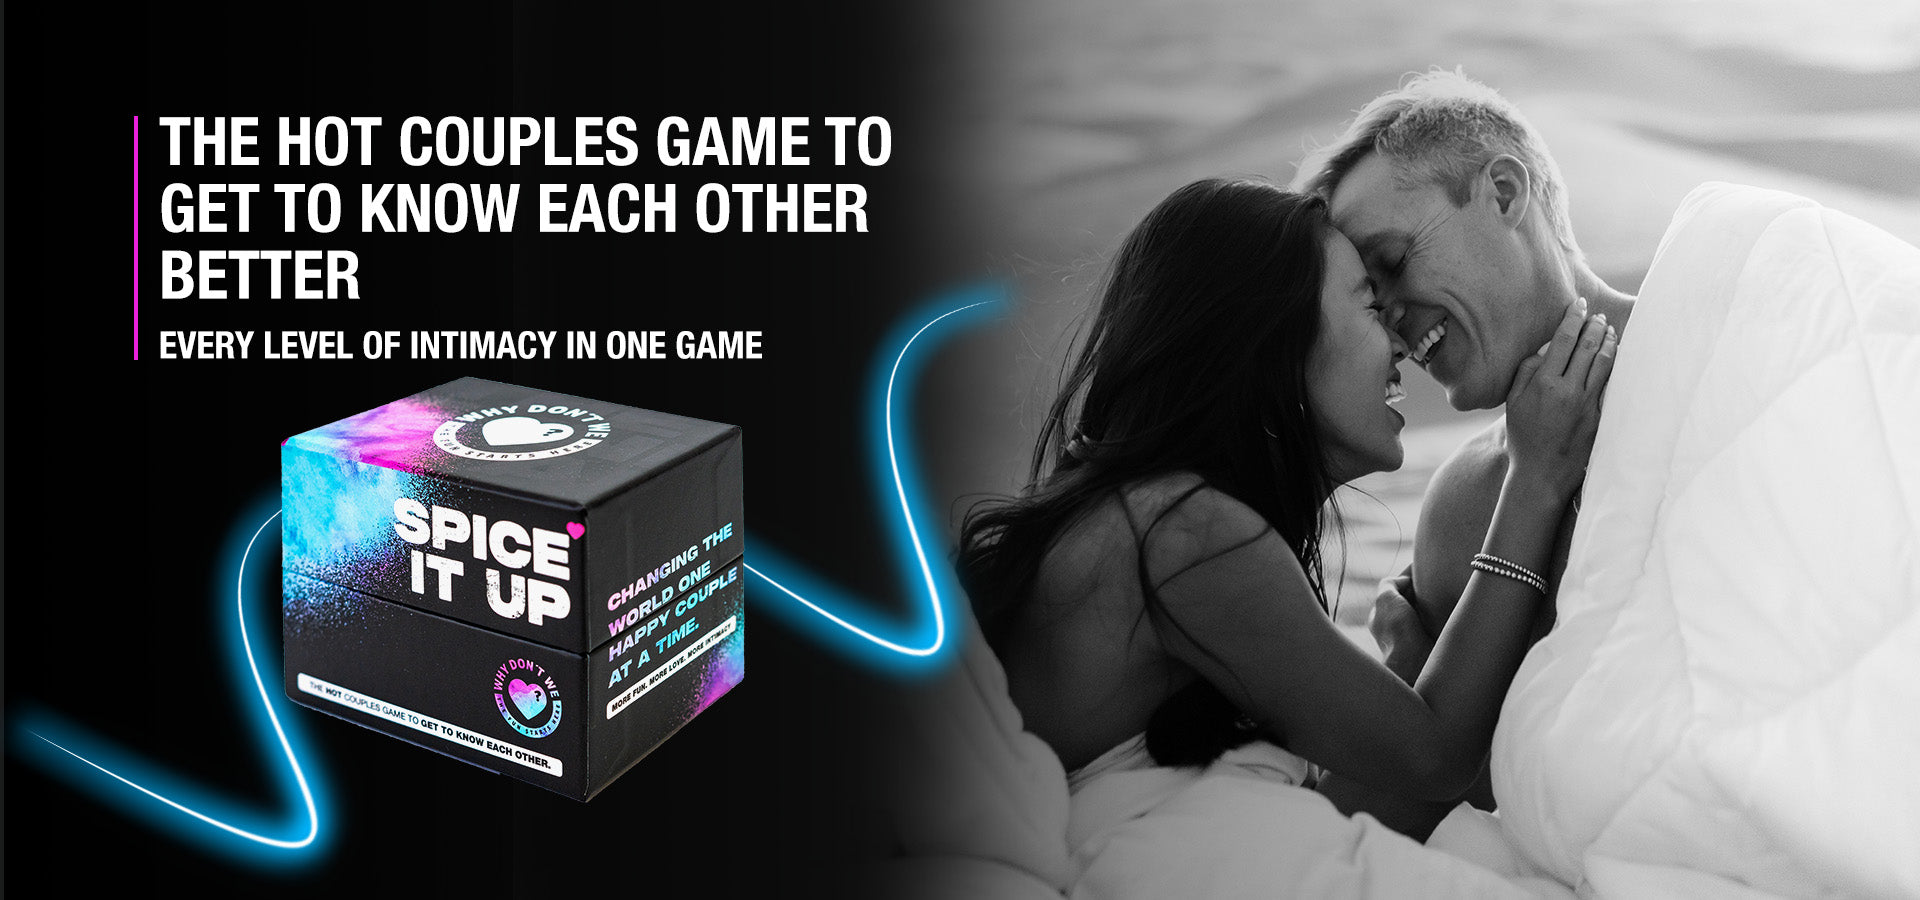 Spice it up - Couple game - Card game - Shop - romantic - Gift - Games - Couples - Relationship -Bedroom games - VISA - Master Card - Discover - American Express - PayPal